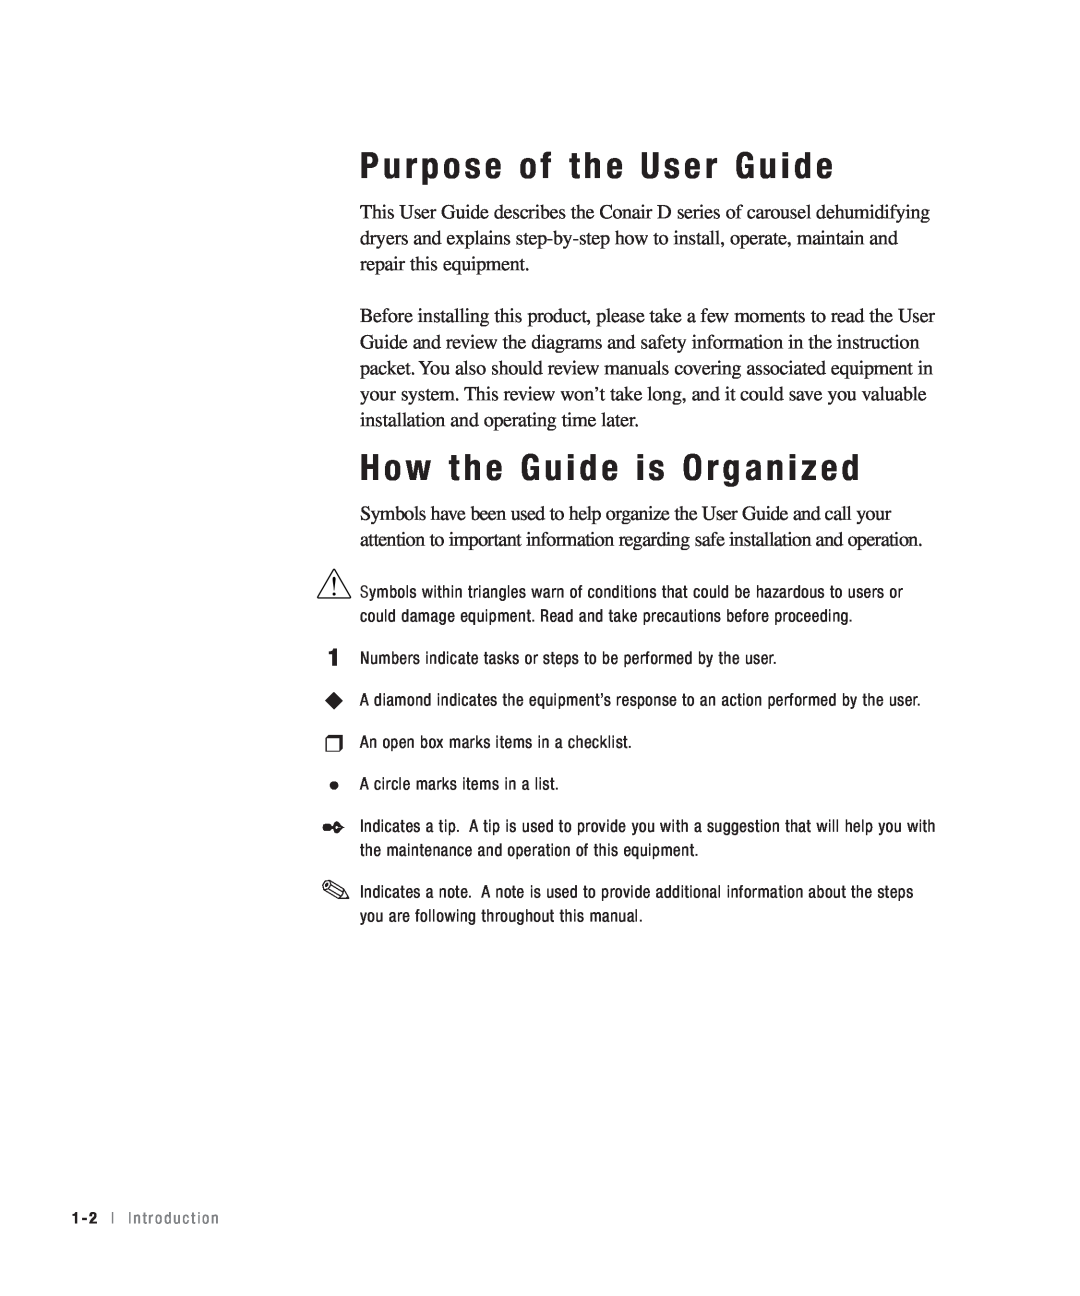 Conair 50, 25, 15, 100 specifications Purpose of the User Guide, How the Guide is Organized 